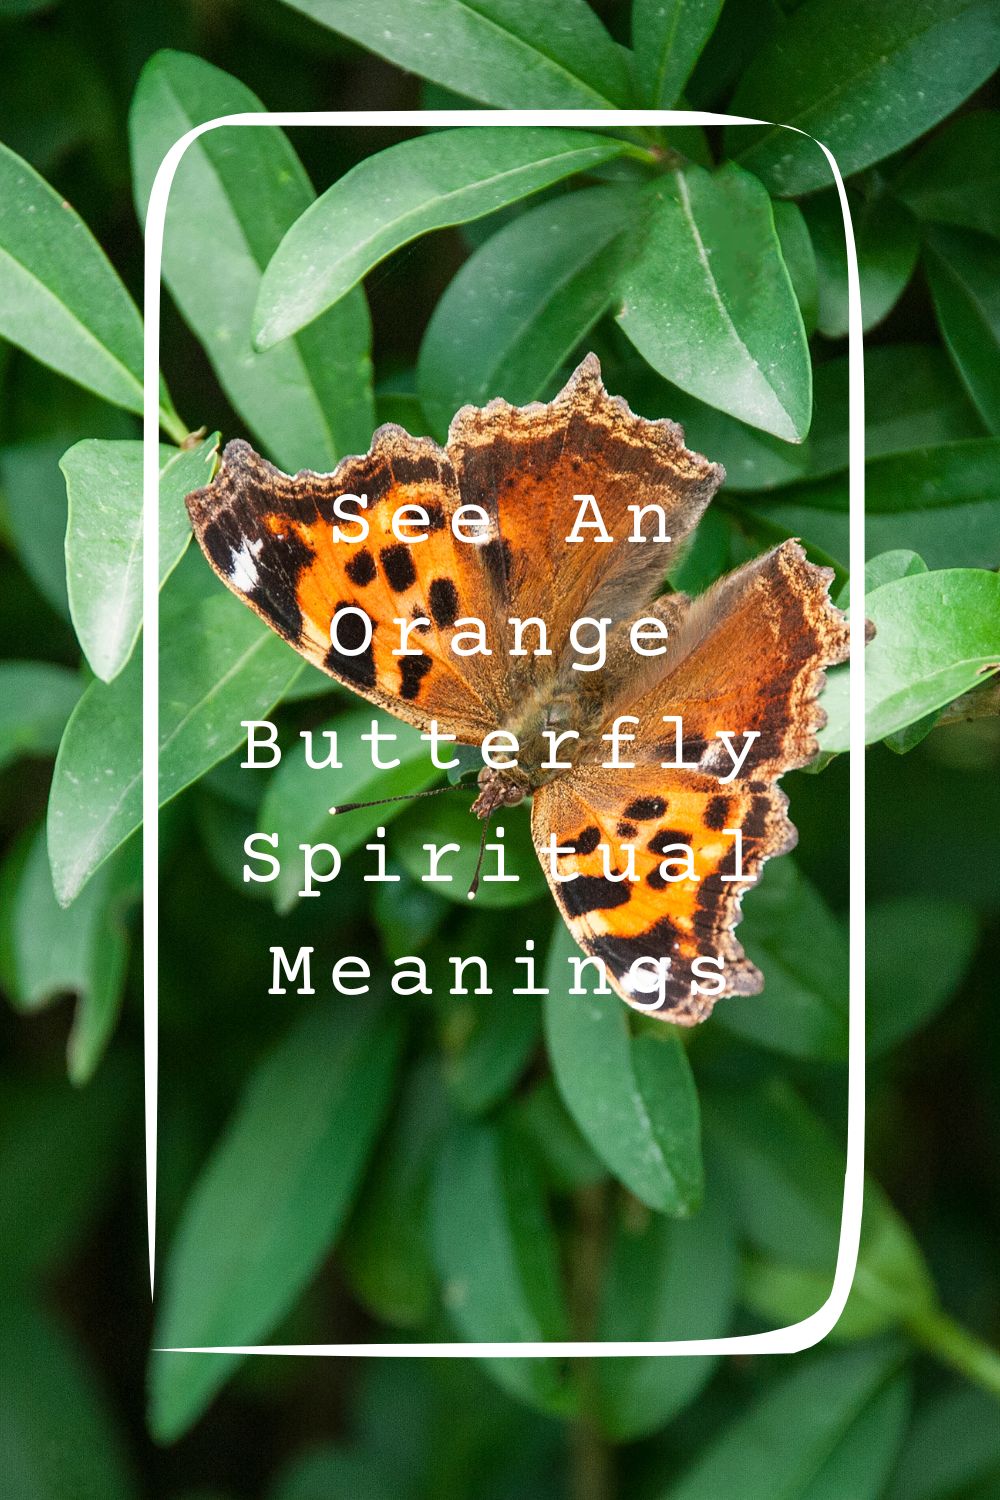 4 See An Orange Butterfly Spiritual Meanings4